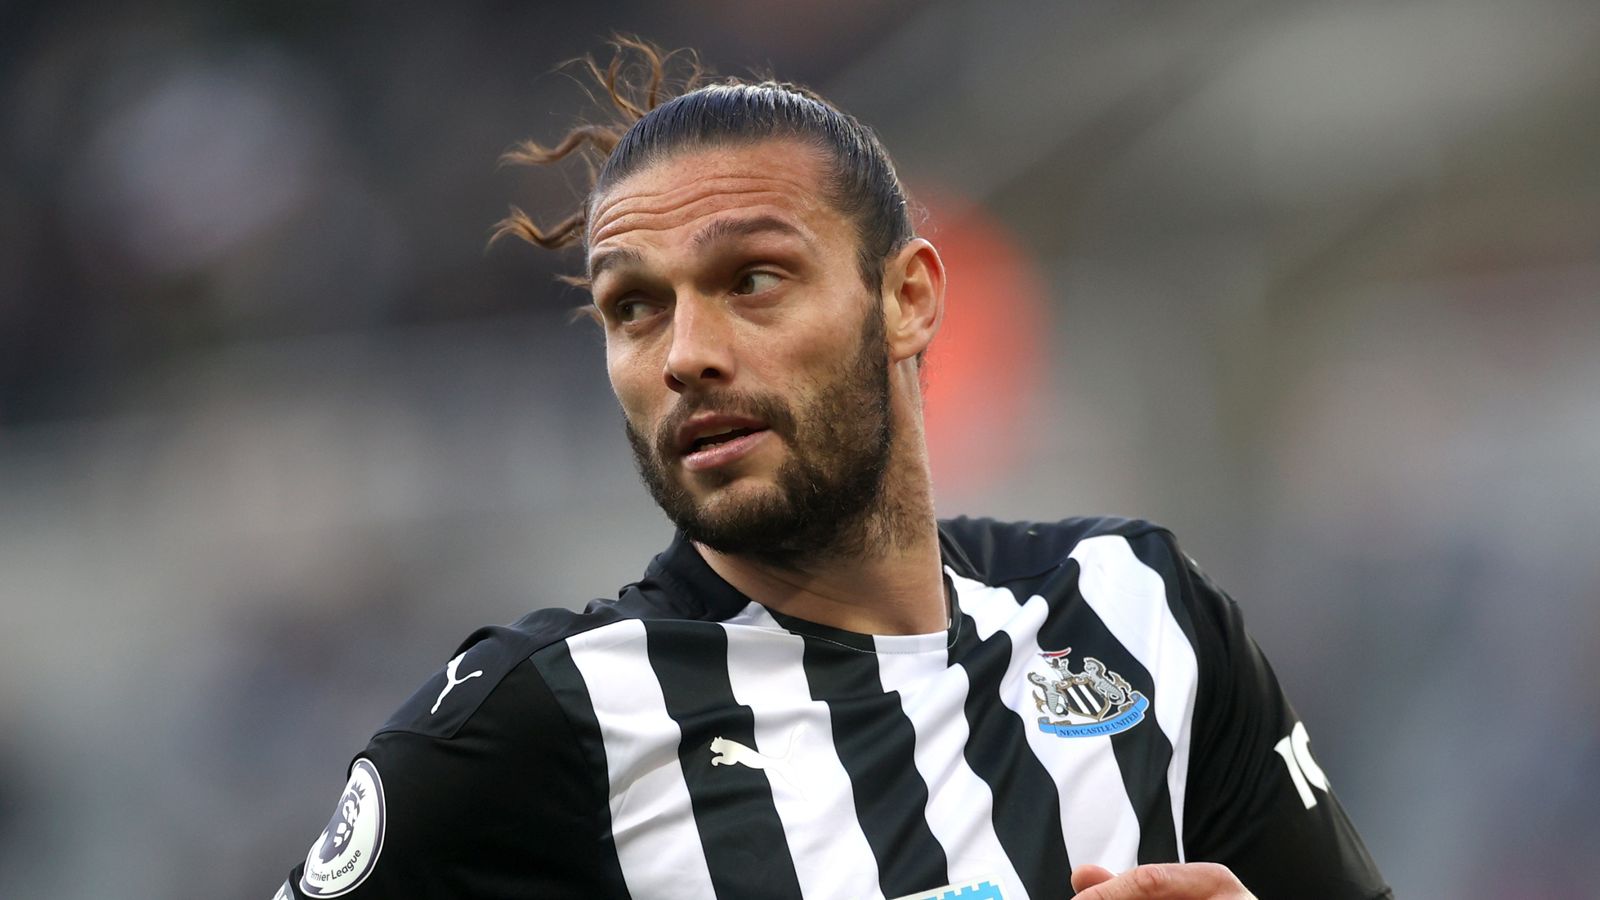 Andy Carroll: Newcastle coach Steve Bruce confirms forward has left club following expiration of his contract | Sky Sports